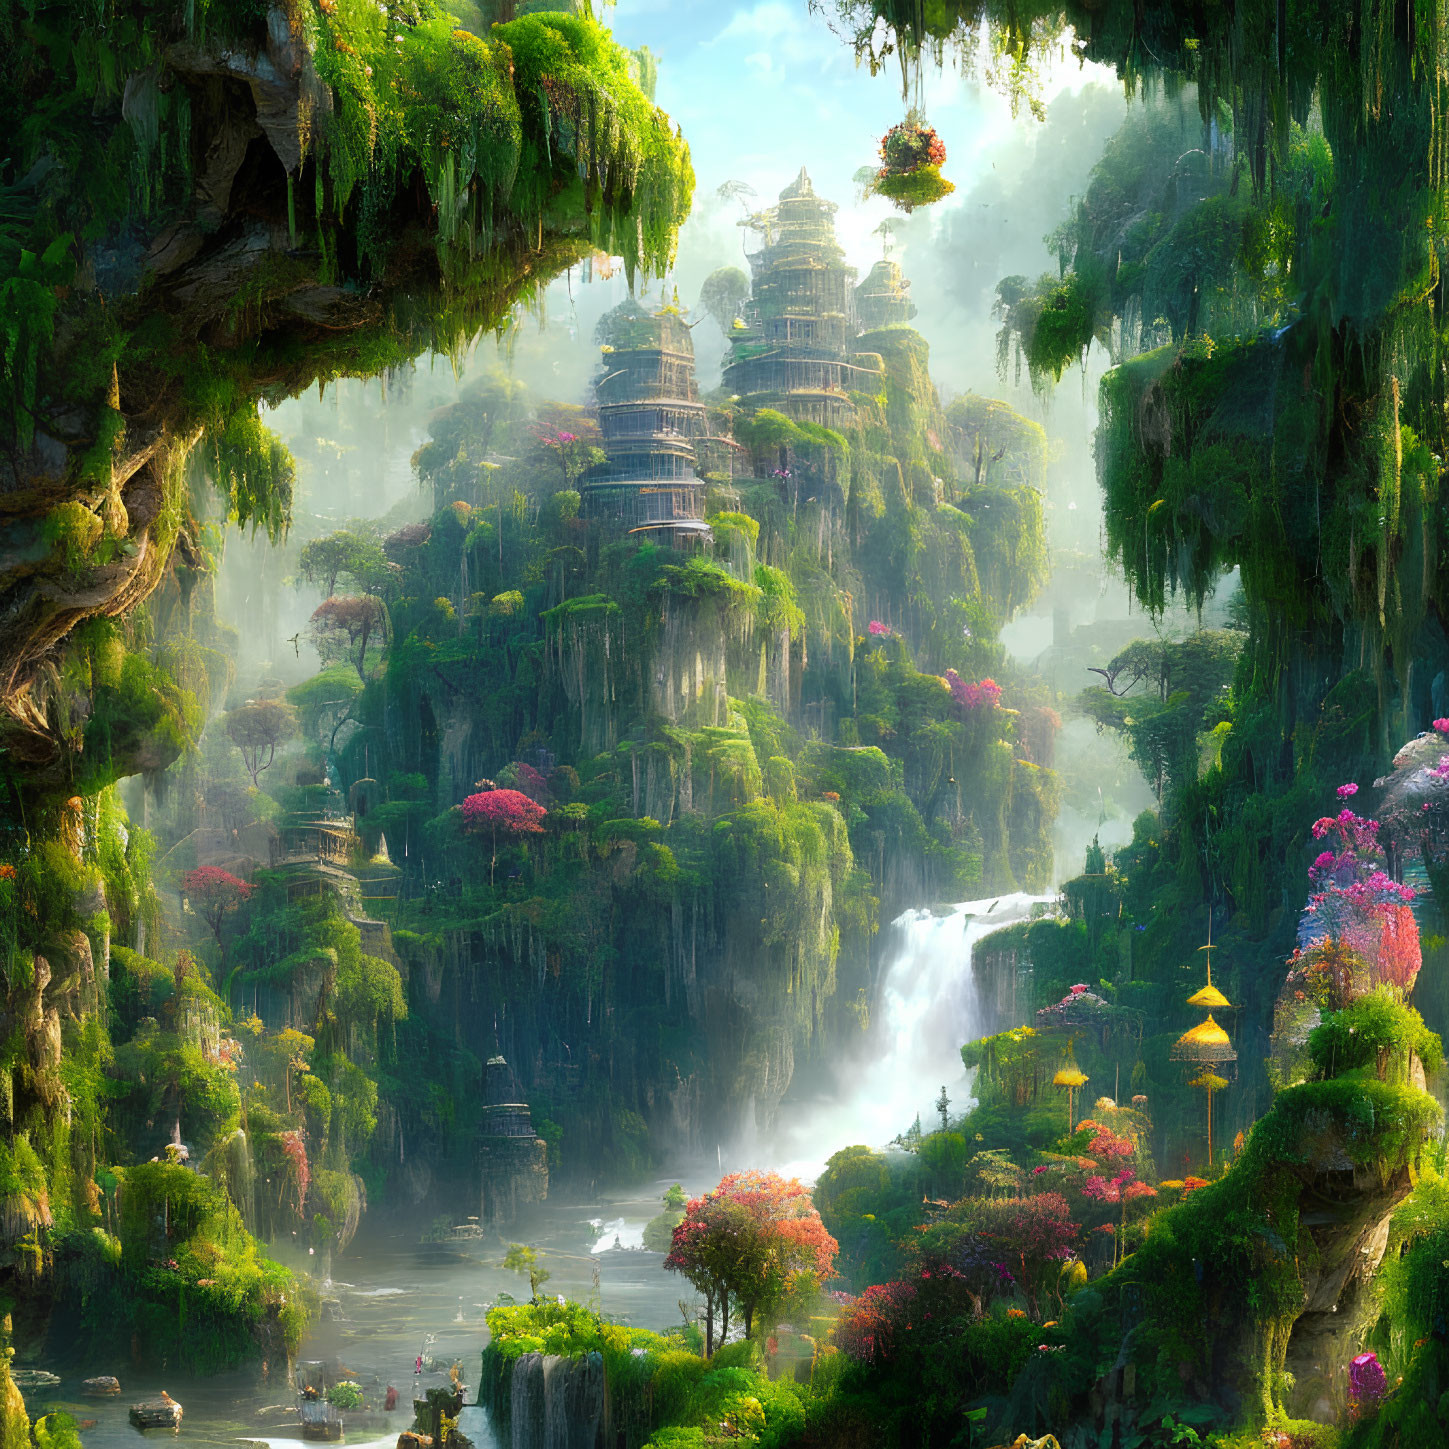 Vibrant fantasy landscape with waterfalls, exotic plants, and ancient temples